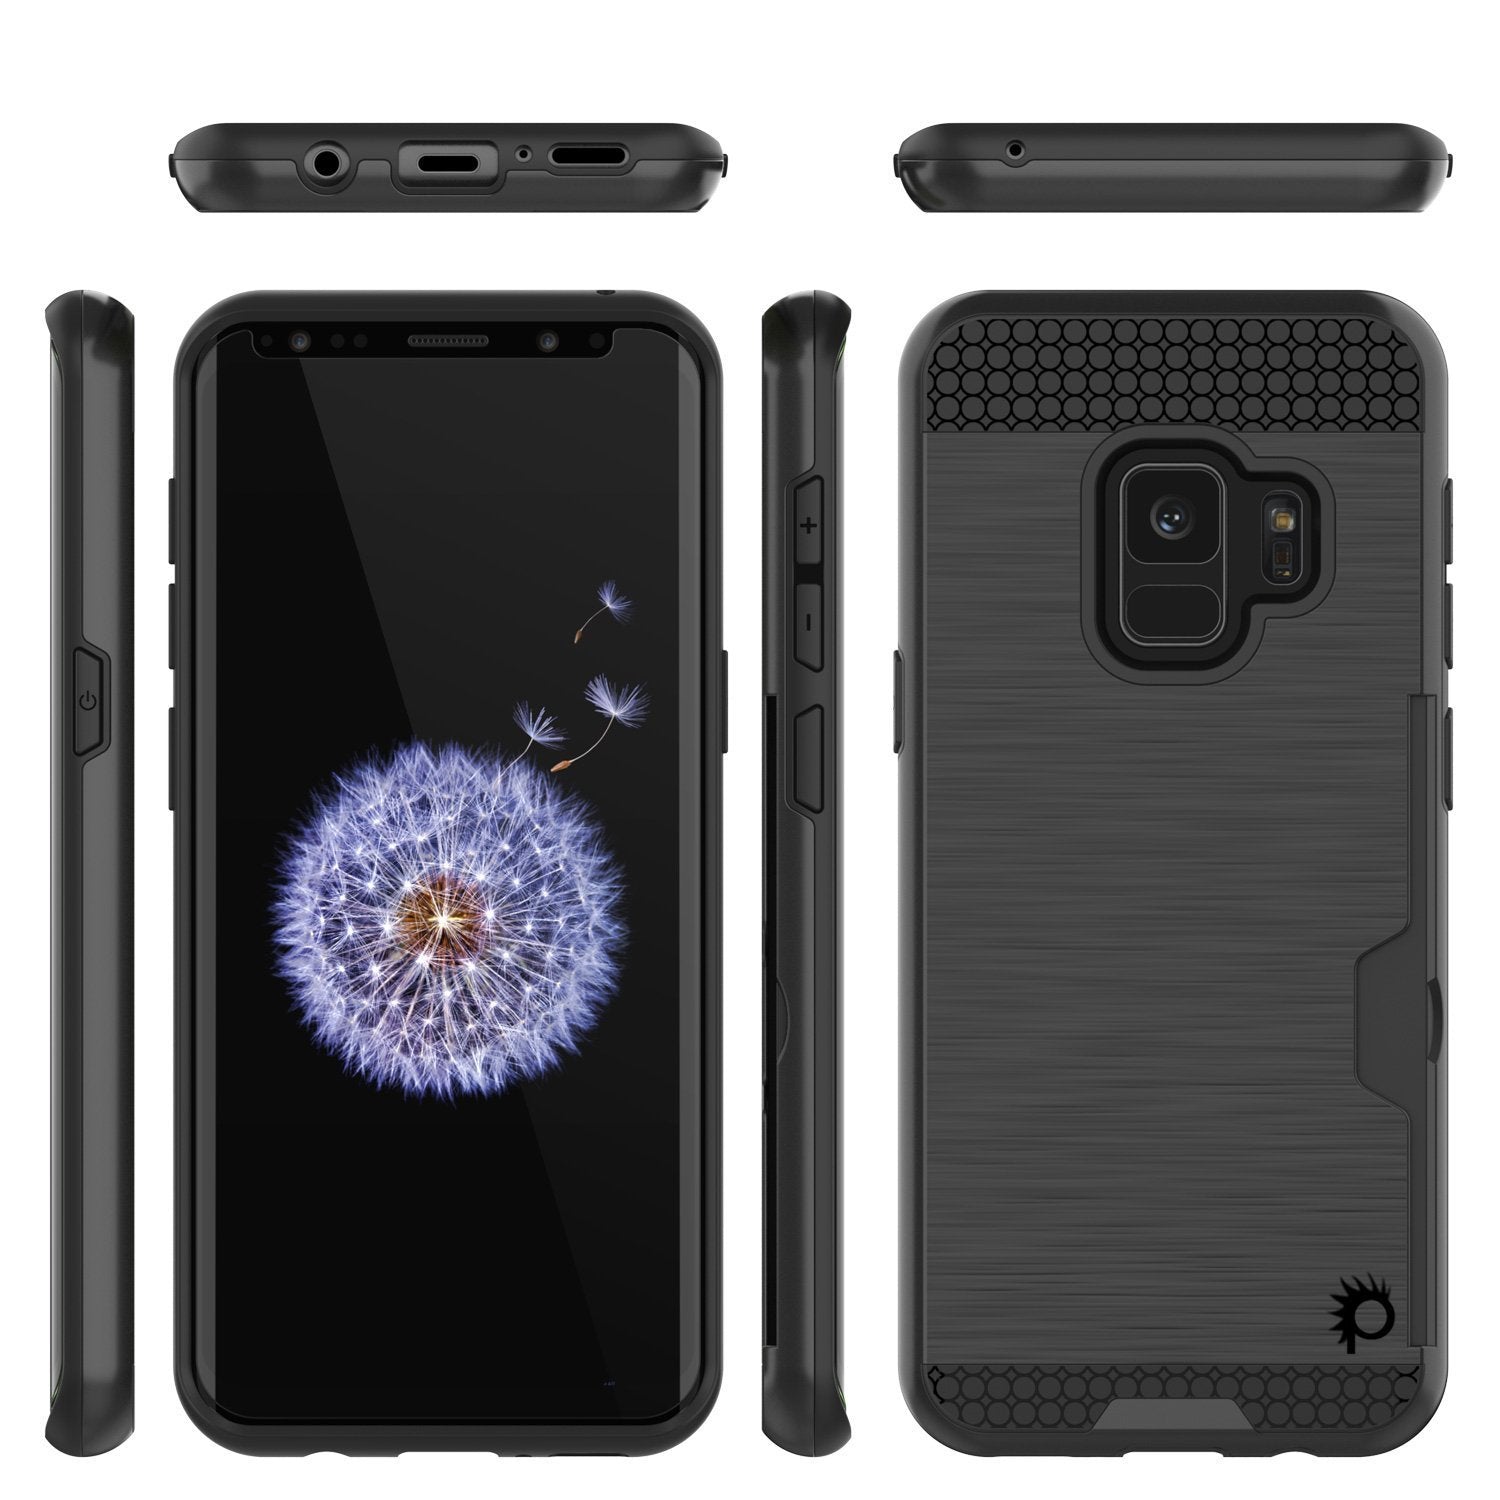 Galaxy S9 Case, PUNKcase [SLOT Series] [Slim Fit] Dual-Layer Armor Cover w/Integrated Anti-Shock System, Credit Card Slot [Black] - PunkCase NZ